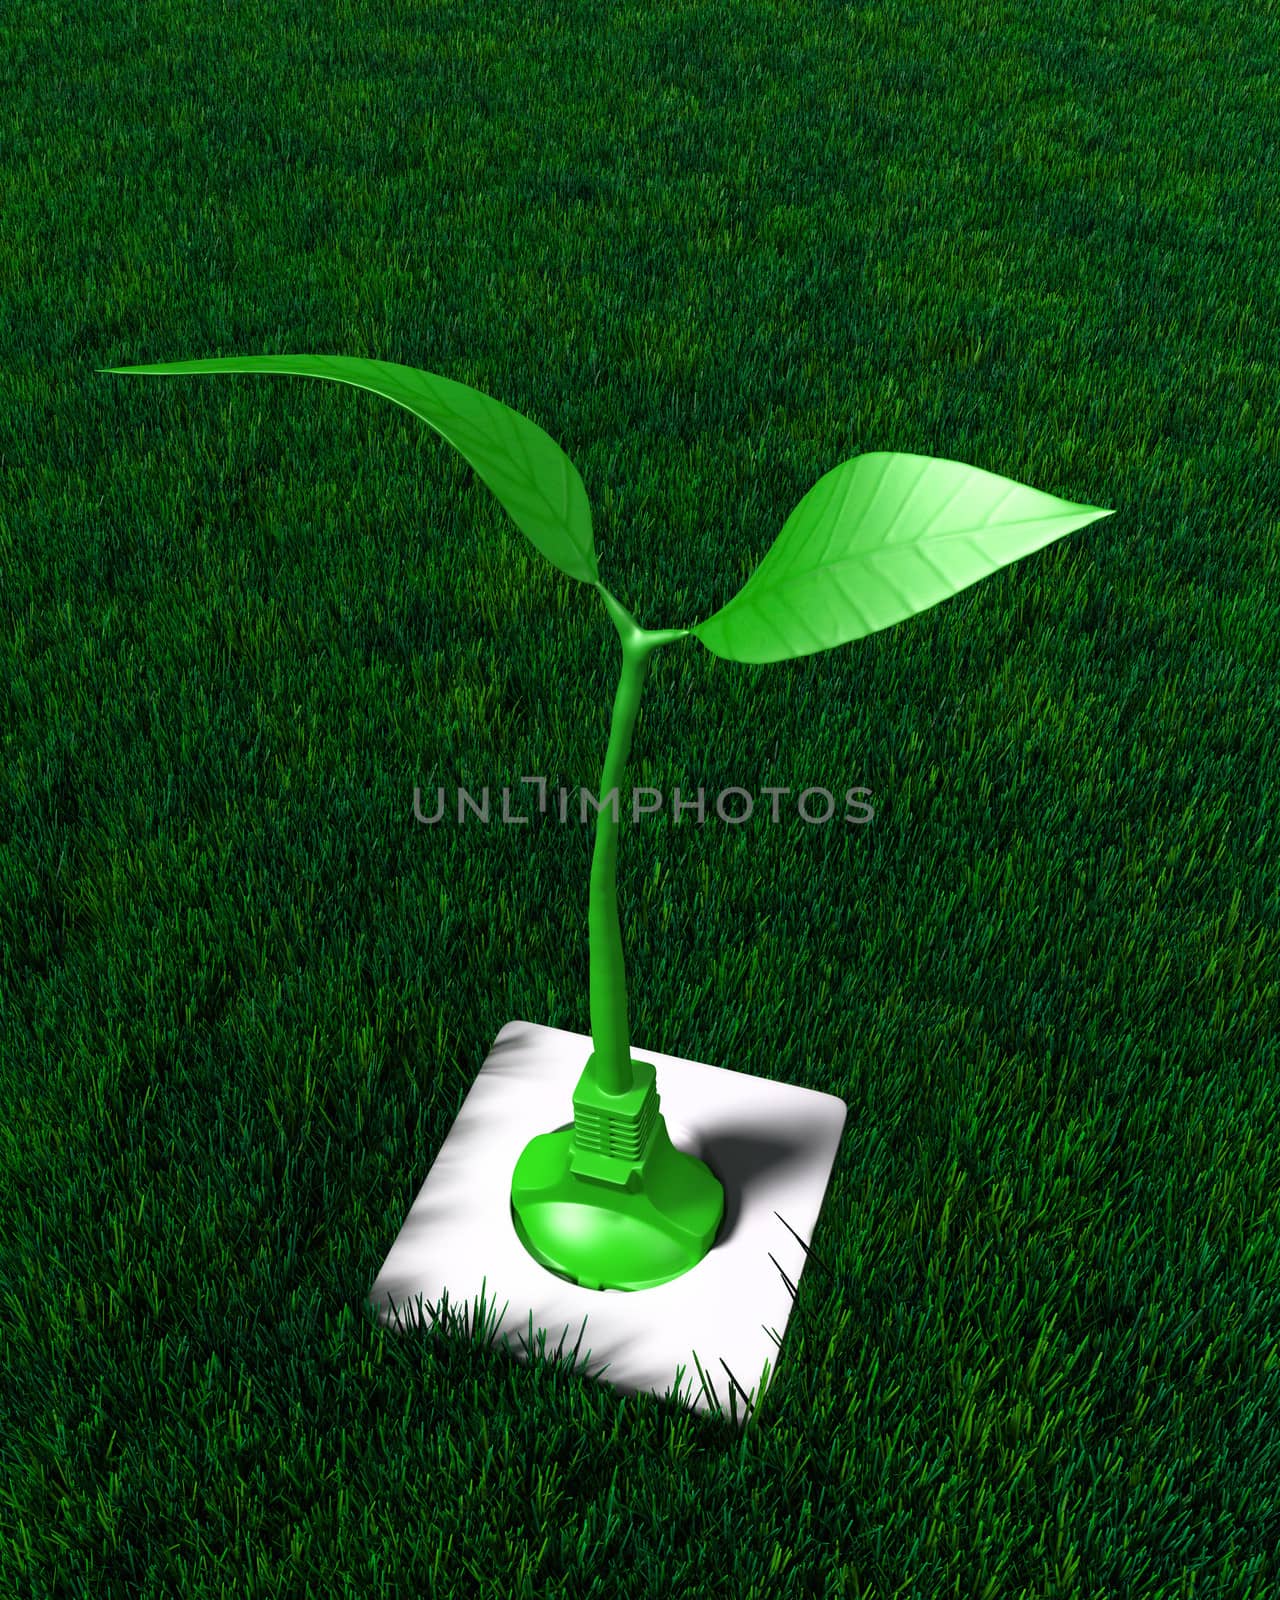 a plug which the cable takes the form of a small plant is inserted into a socket placed in a lawn